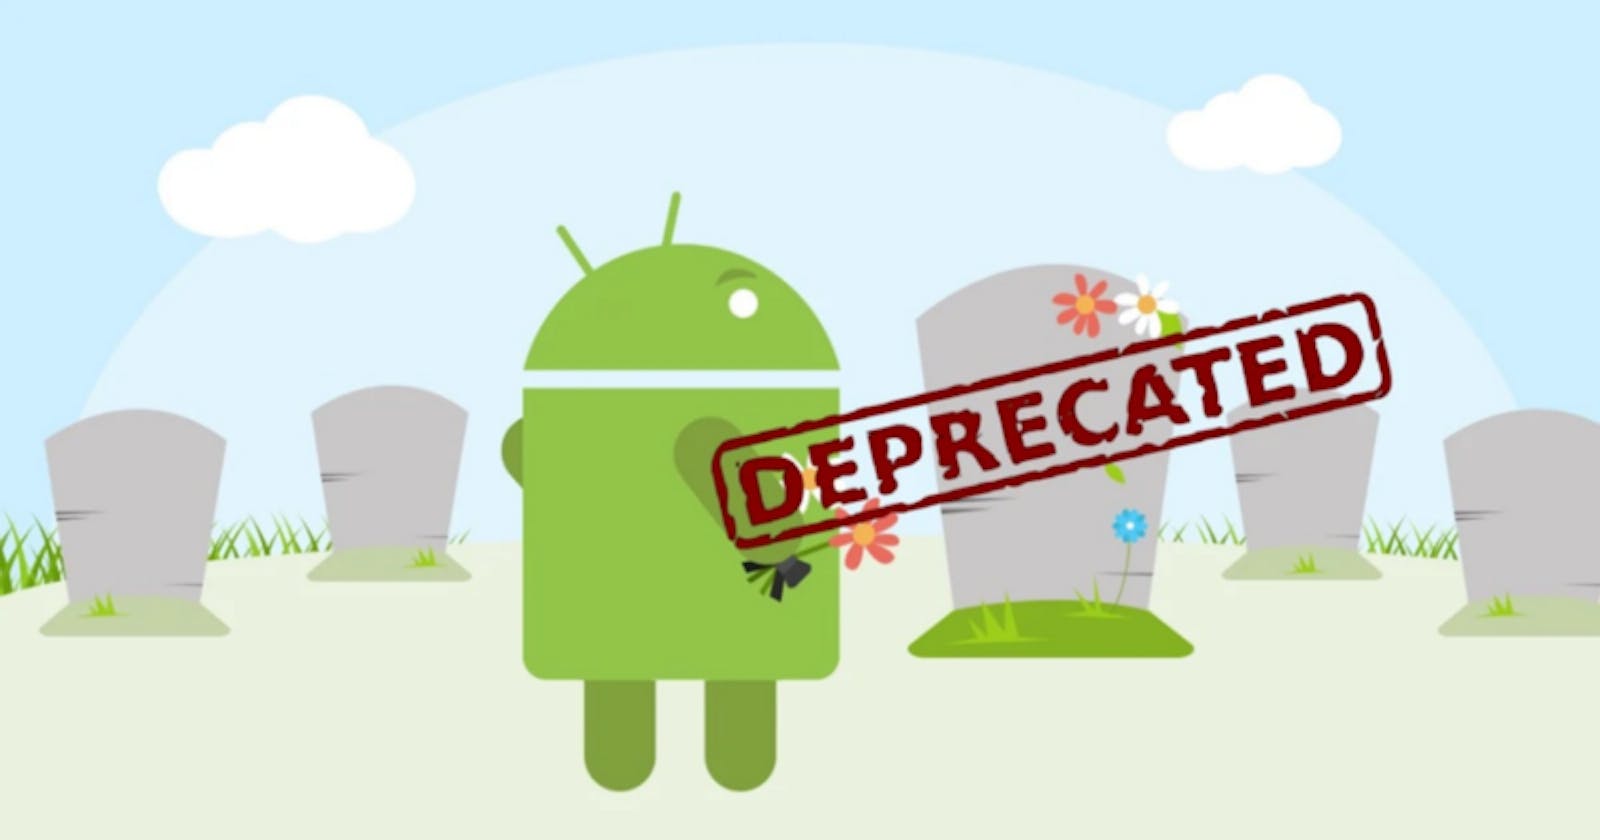 OptionsMenu deprecated in Fragments ... Now what? - Android